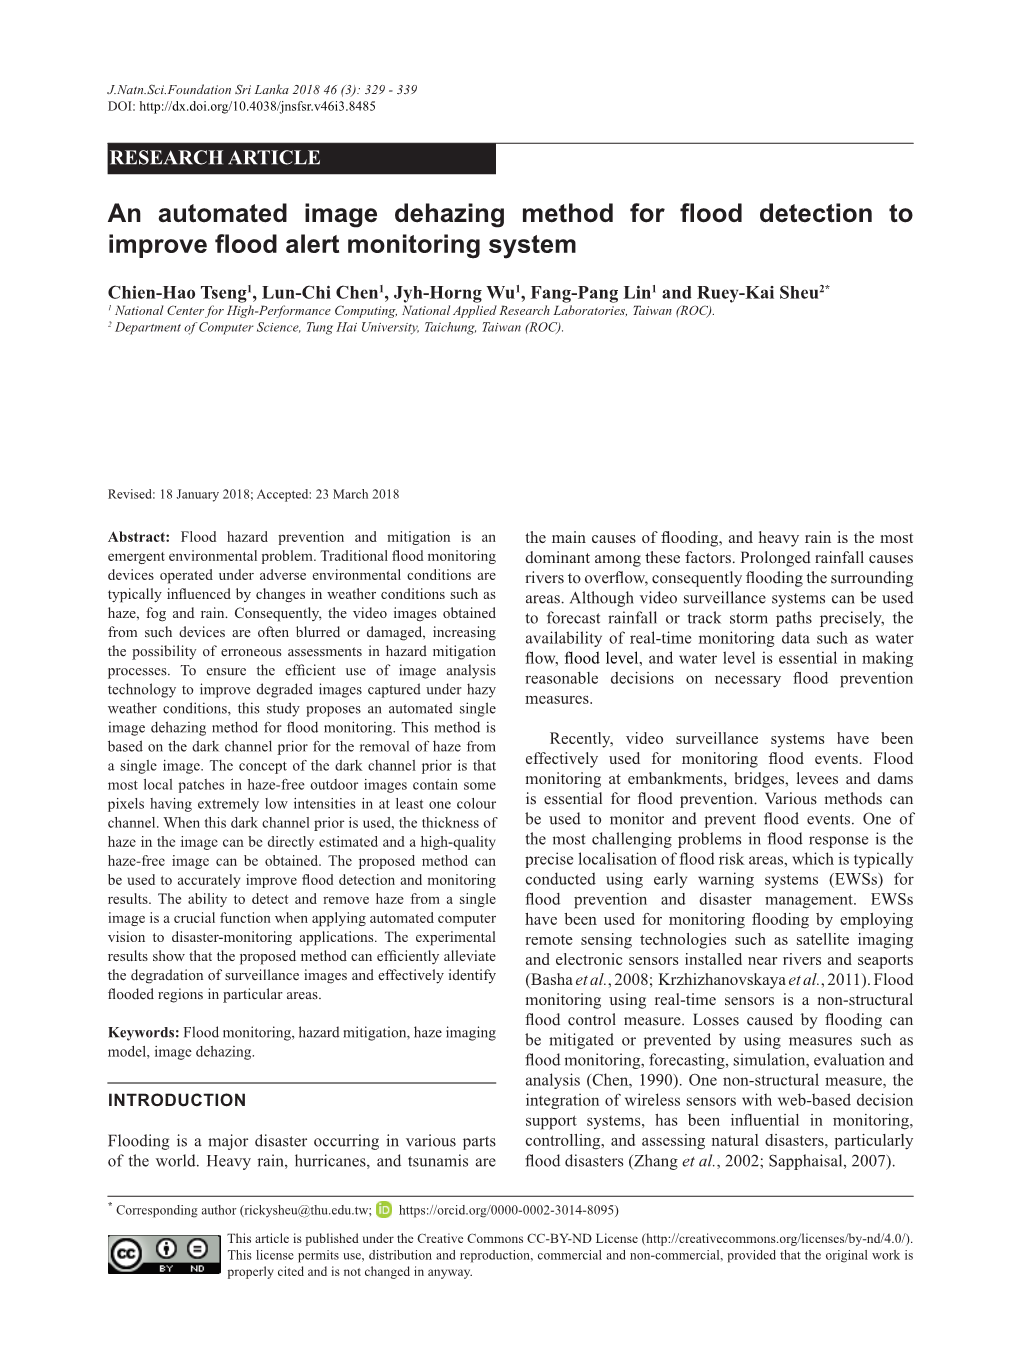 An Automated Image Dehazing Method for Flood Detection to Improve Flood Alert Monitoring System